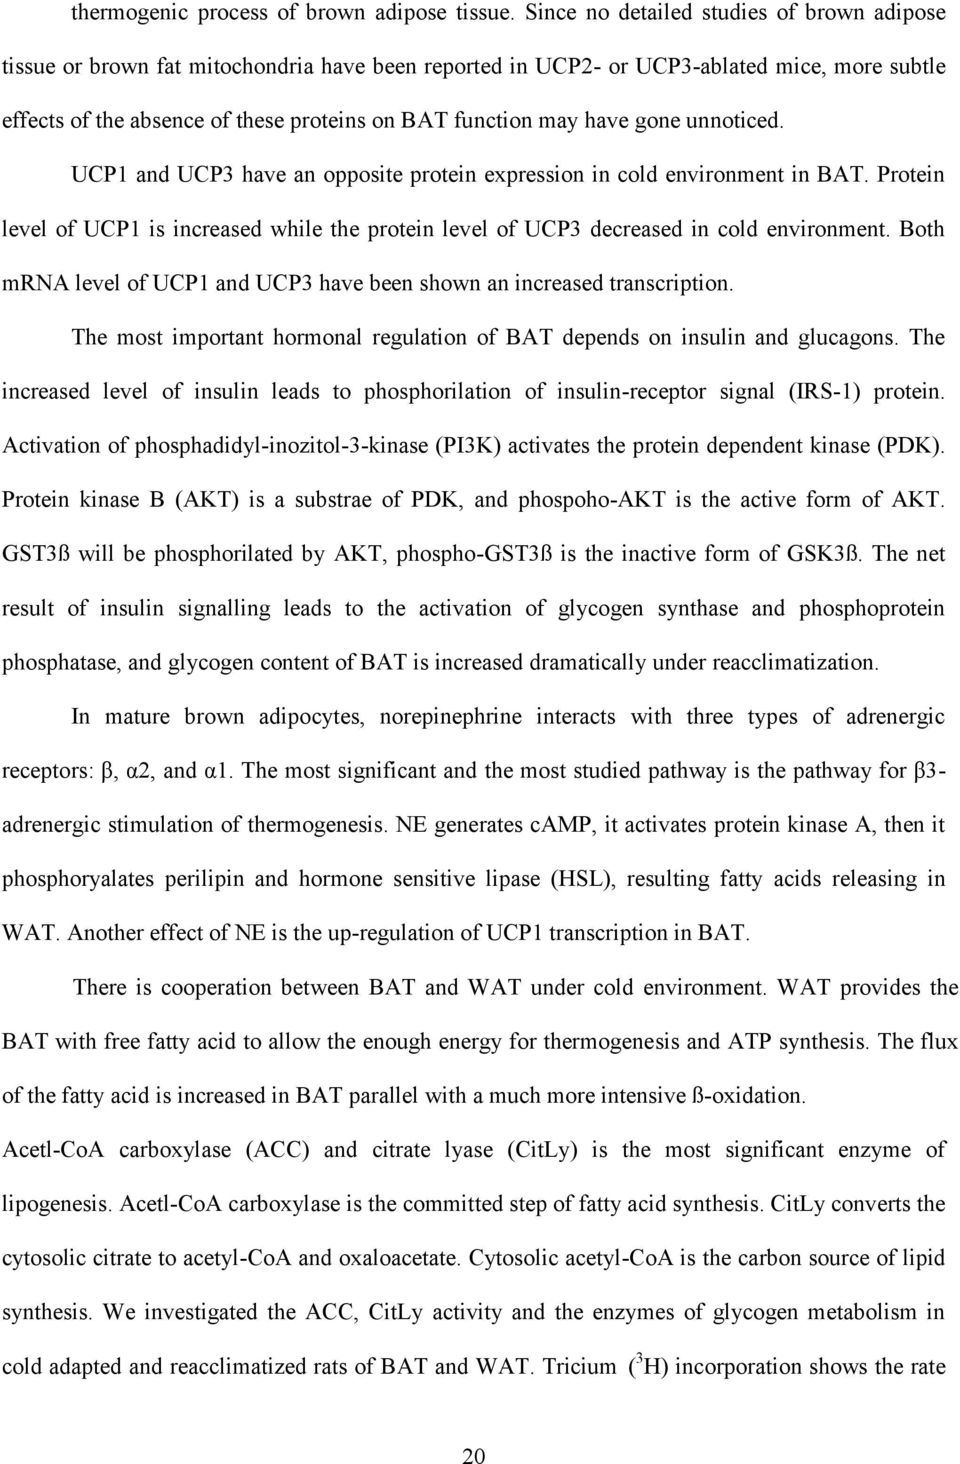 have gone unnoticed. UCP1 and UCP3 have an opposite protein expression in cold environment in BAT. Protein level of UCP1 is increased while the protein level of UCP3 decreased in cold environment.